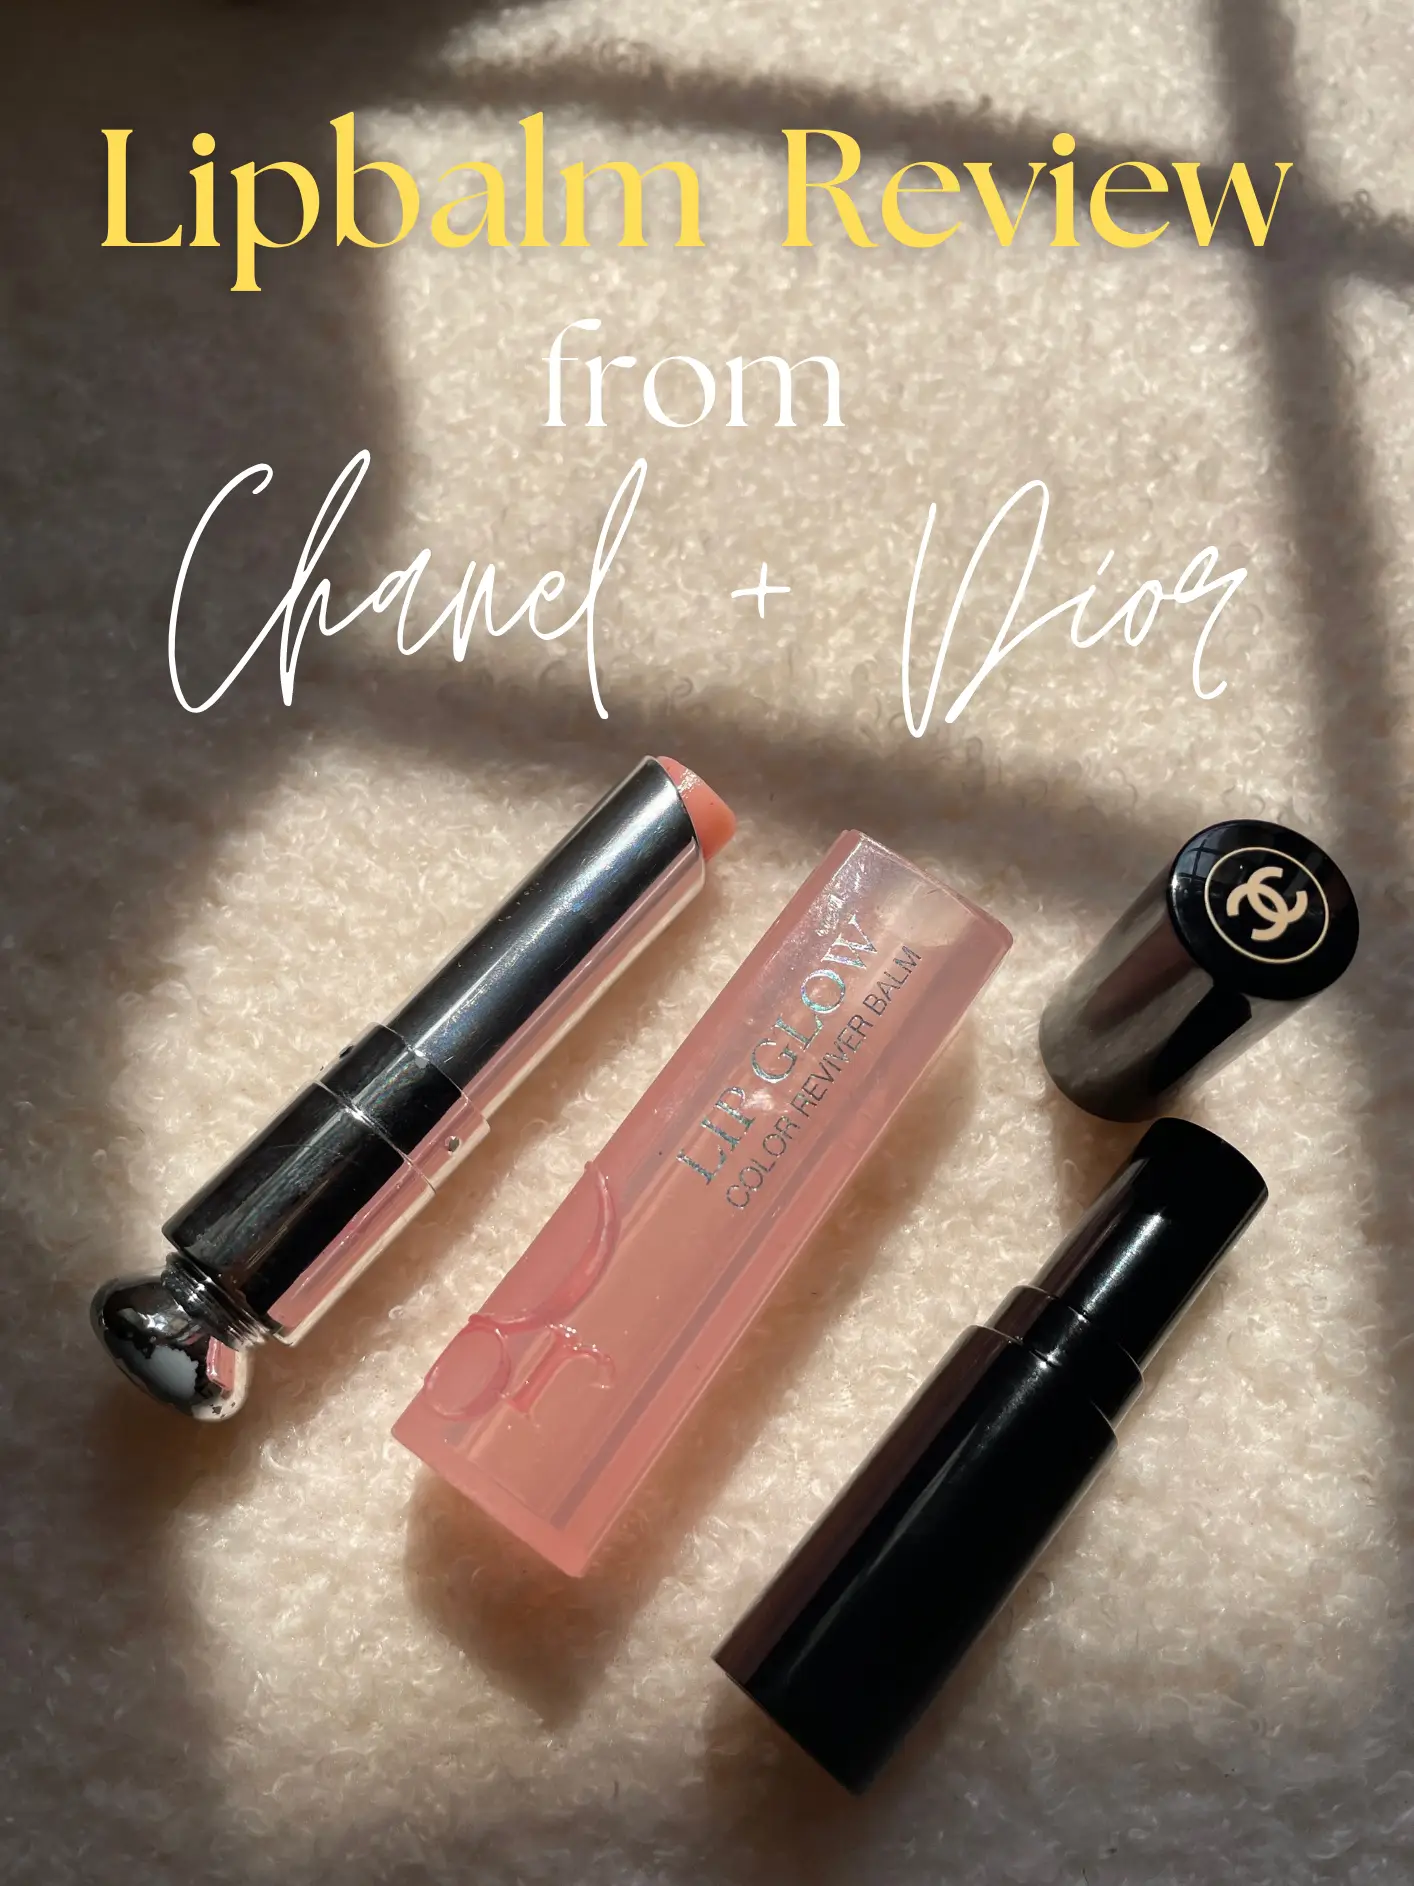 Lipbalm review : Chanel + Dior, Gallery posted by ezuera natasya